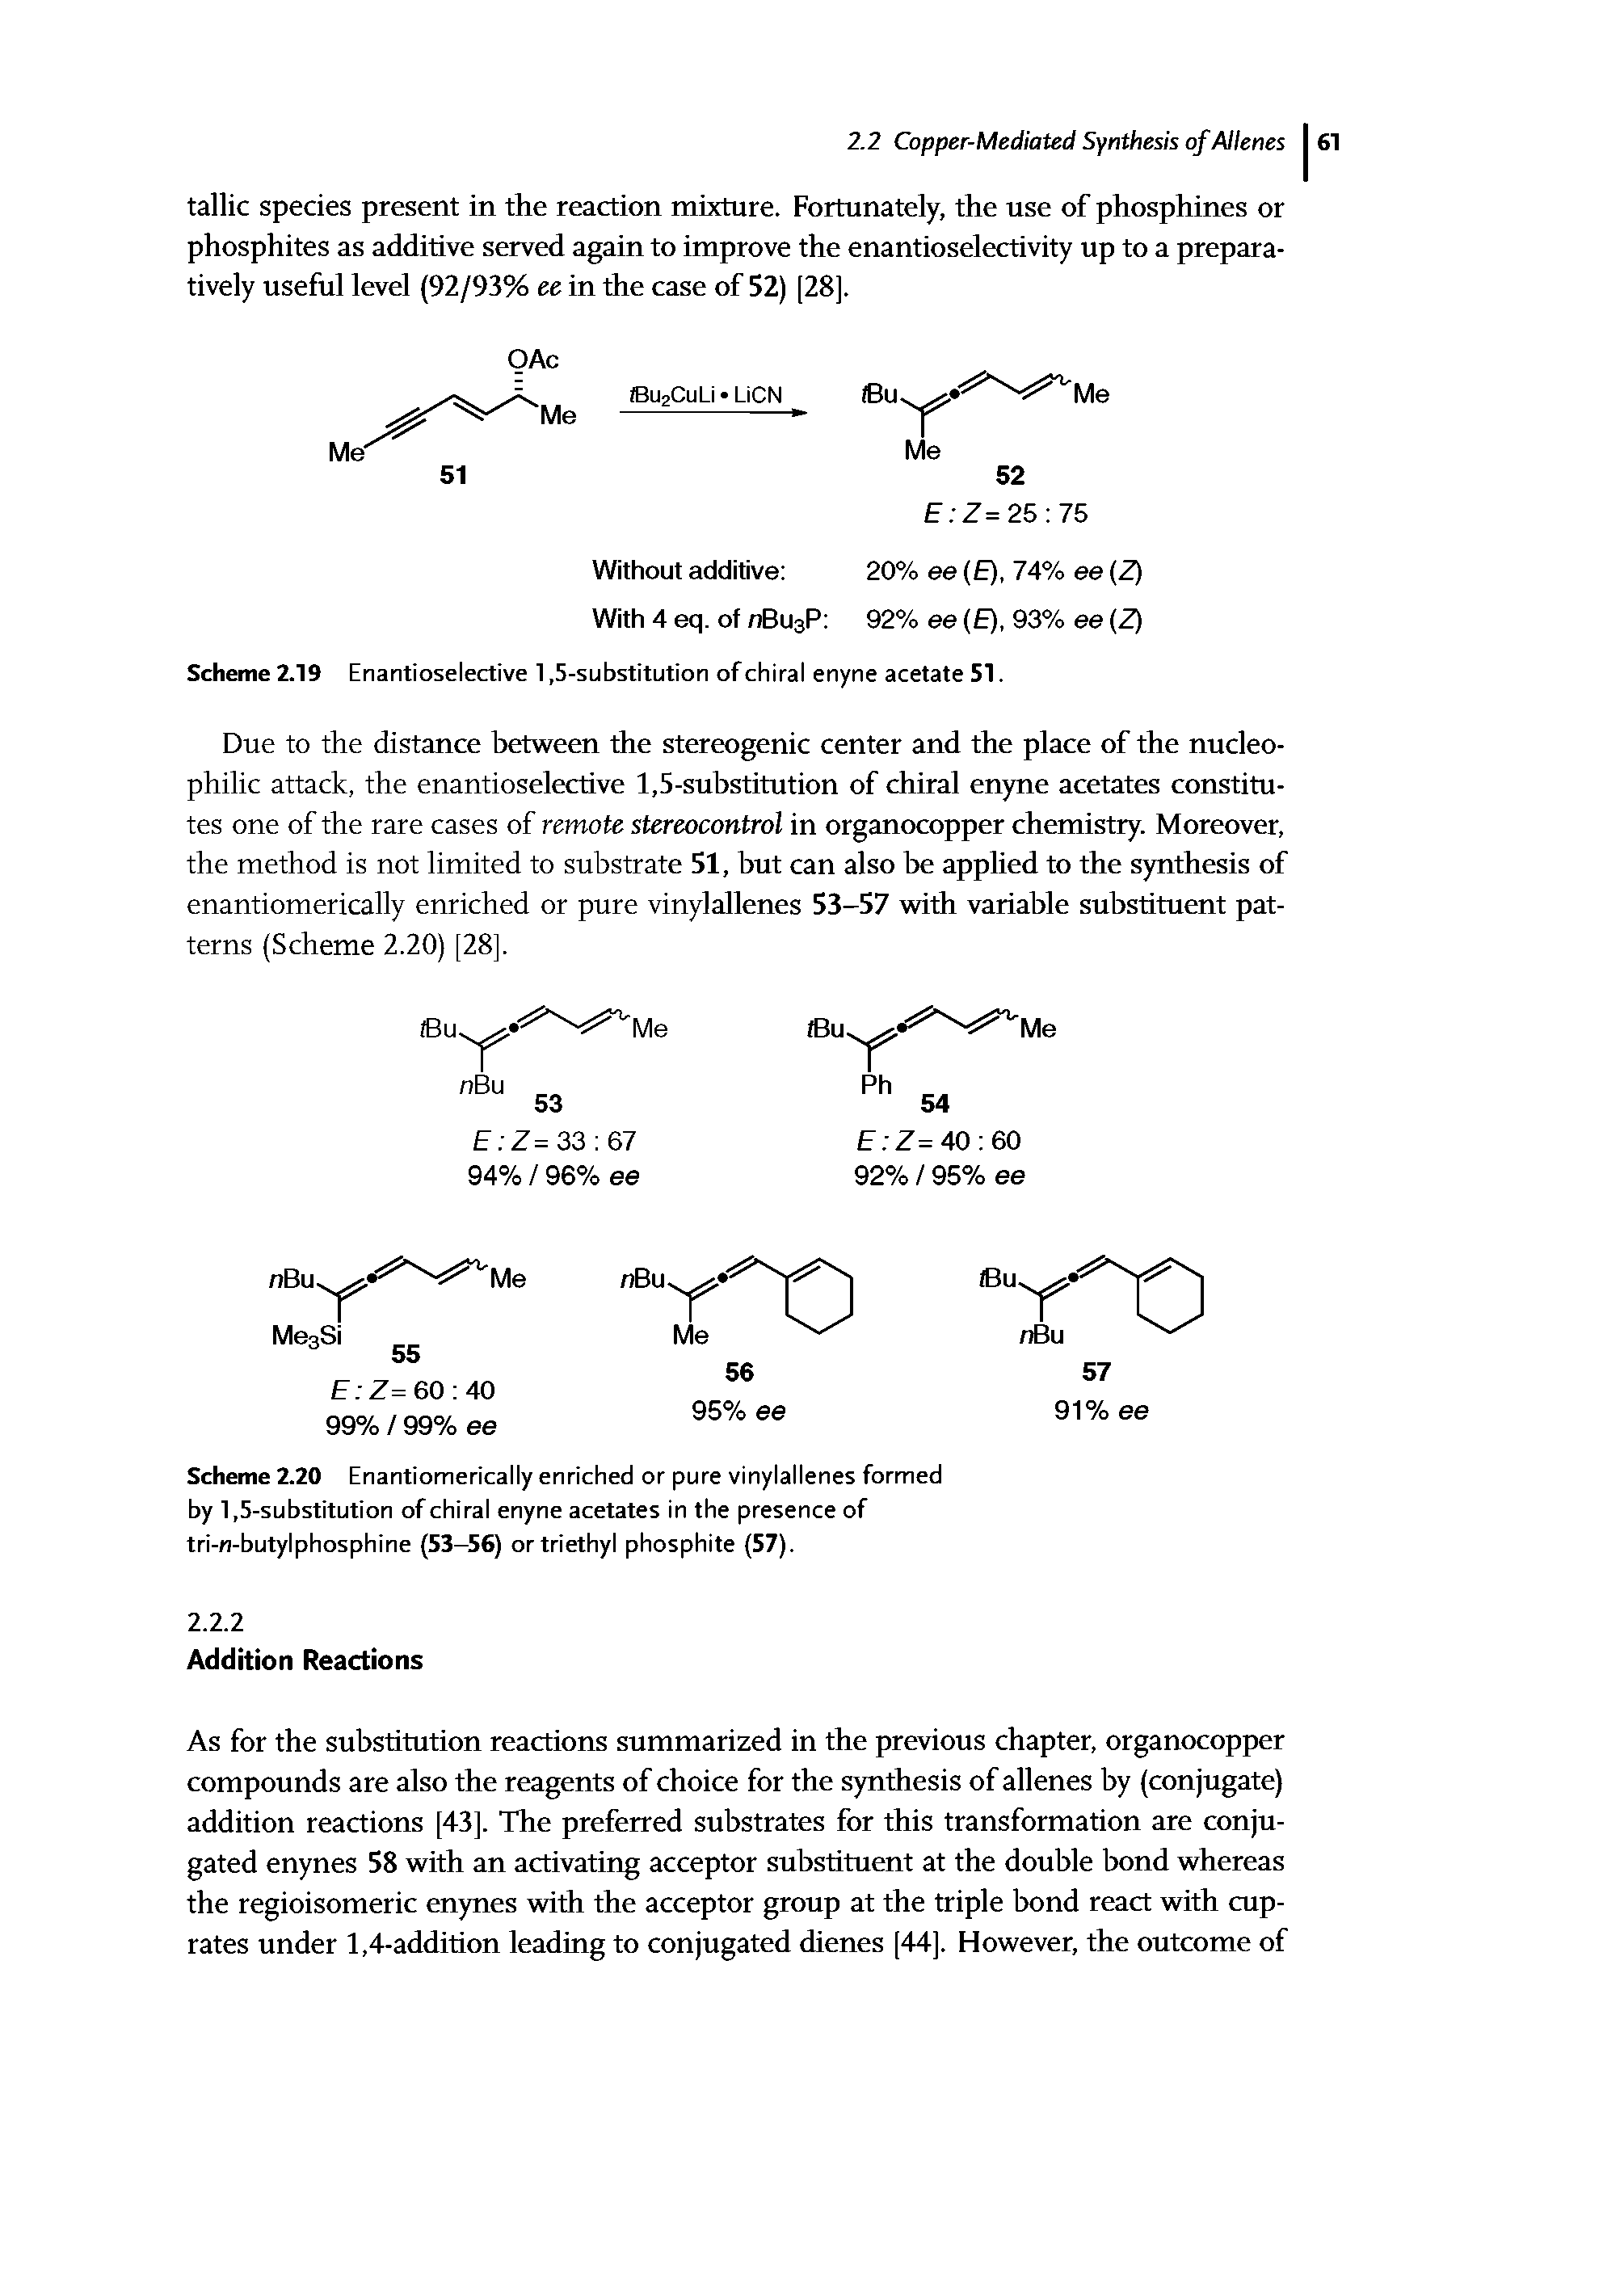 Scheme 2.20 Enantiomerically enriched or pure vinylallenes formed by 1,5-substitution of chiral enyne acetates in the presence of tri-n-butylphosphine (53-56) or triethyl phosphite (57).